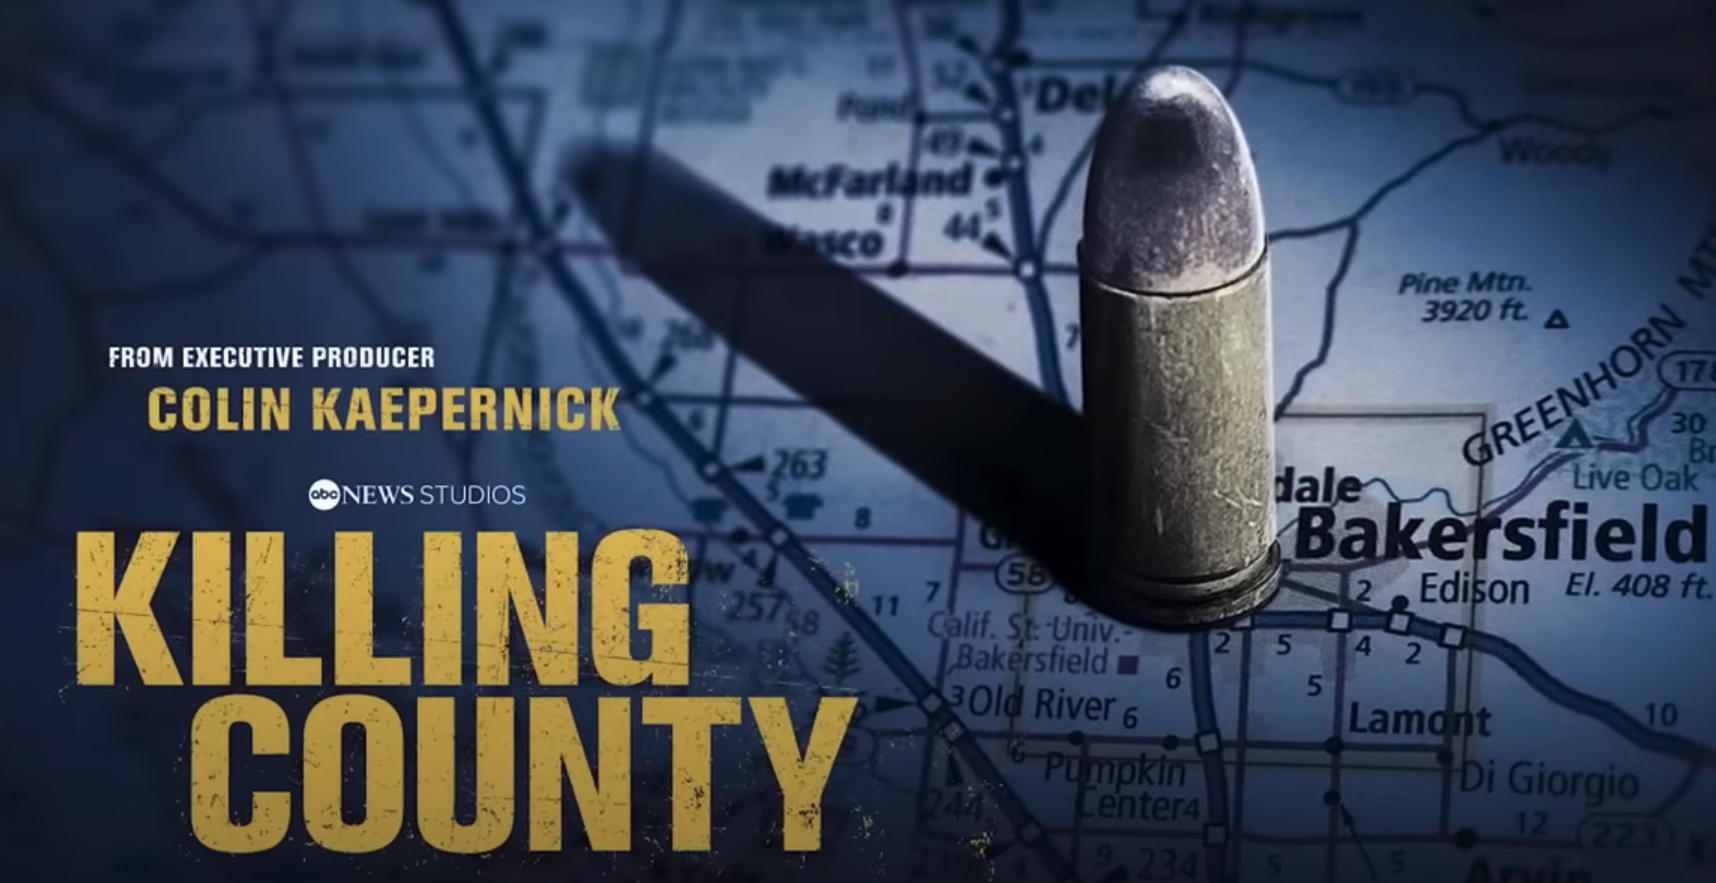 A promo image for the documentary which features a map showing Bakersfield and a bullet placed on top